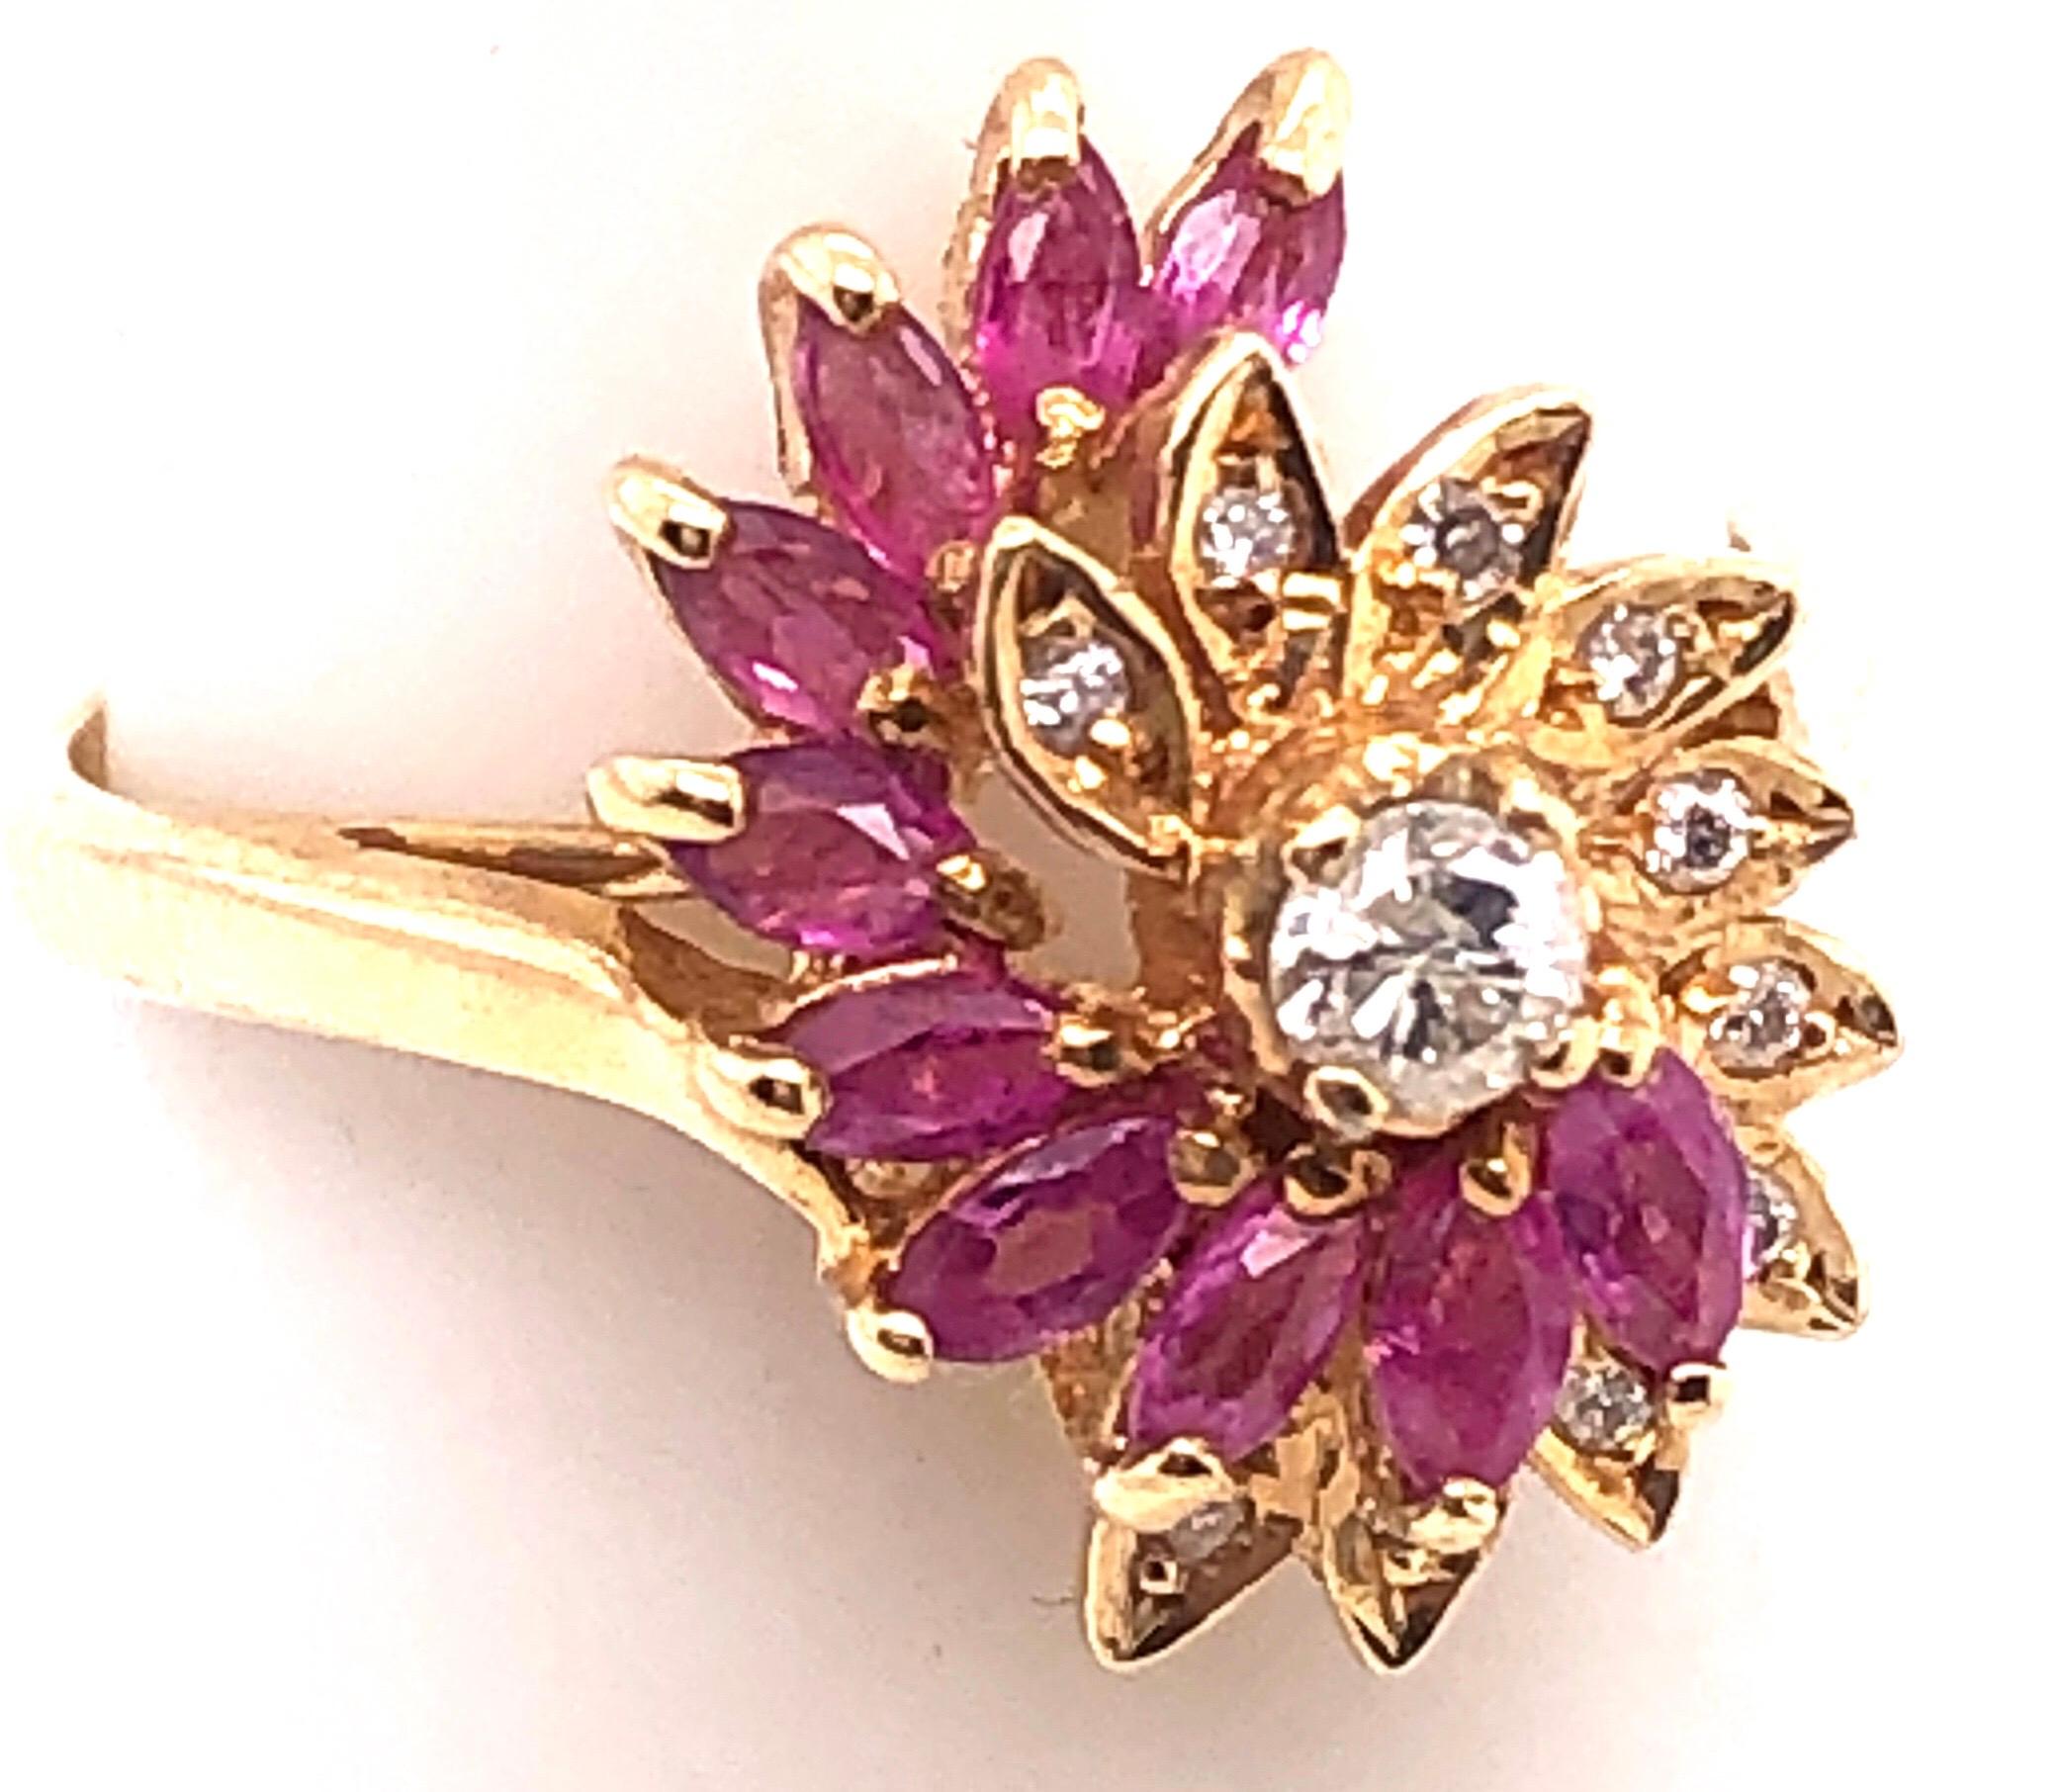 14 Karat Yellow Gold Fashion Ring with Ruby Stones and Diamonds.
0.24 Total diamond weight.
Size 5
2.82 grams total weight.
